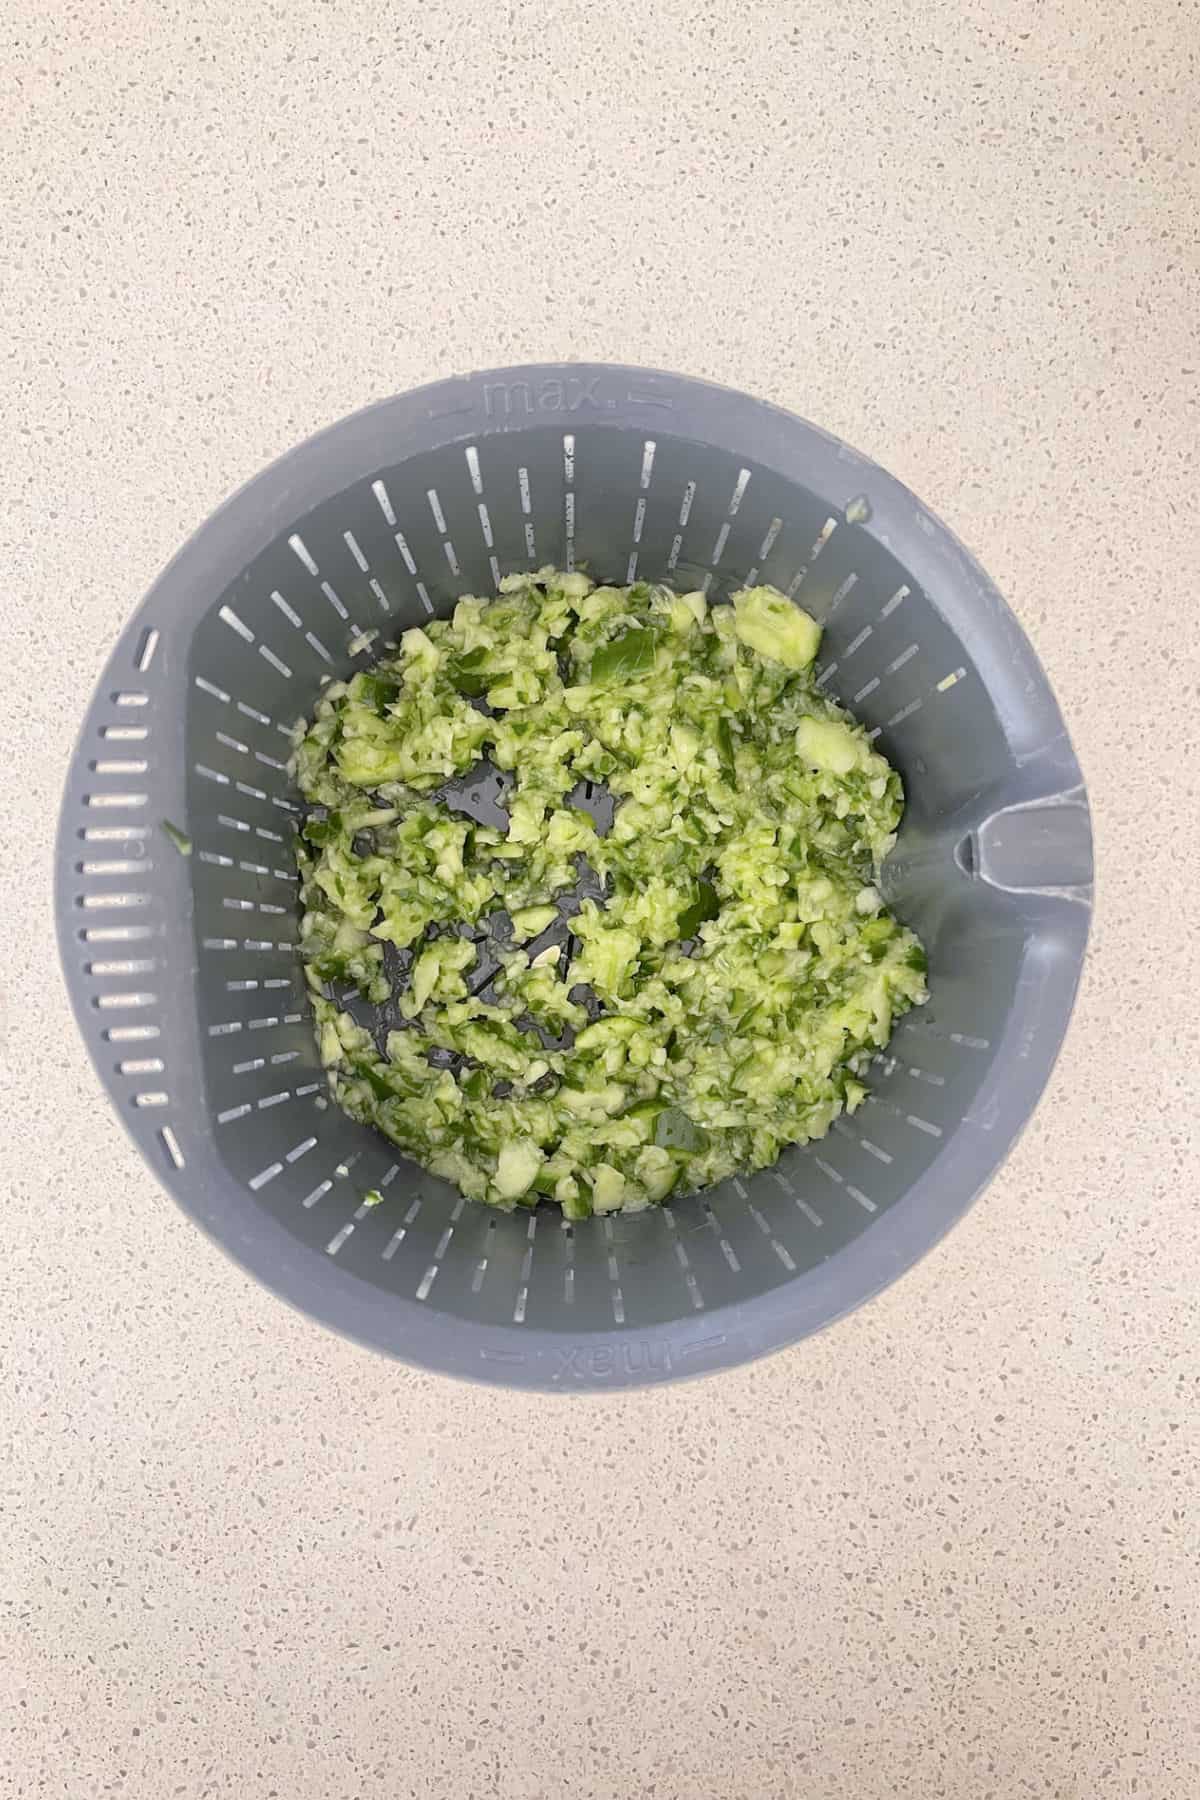 Cucumber pieces draining in a thermomix basket.